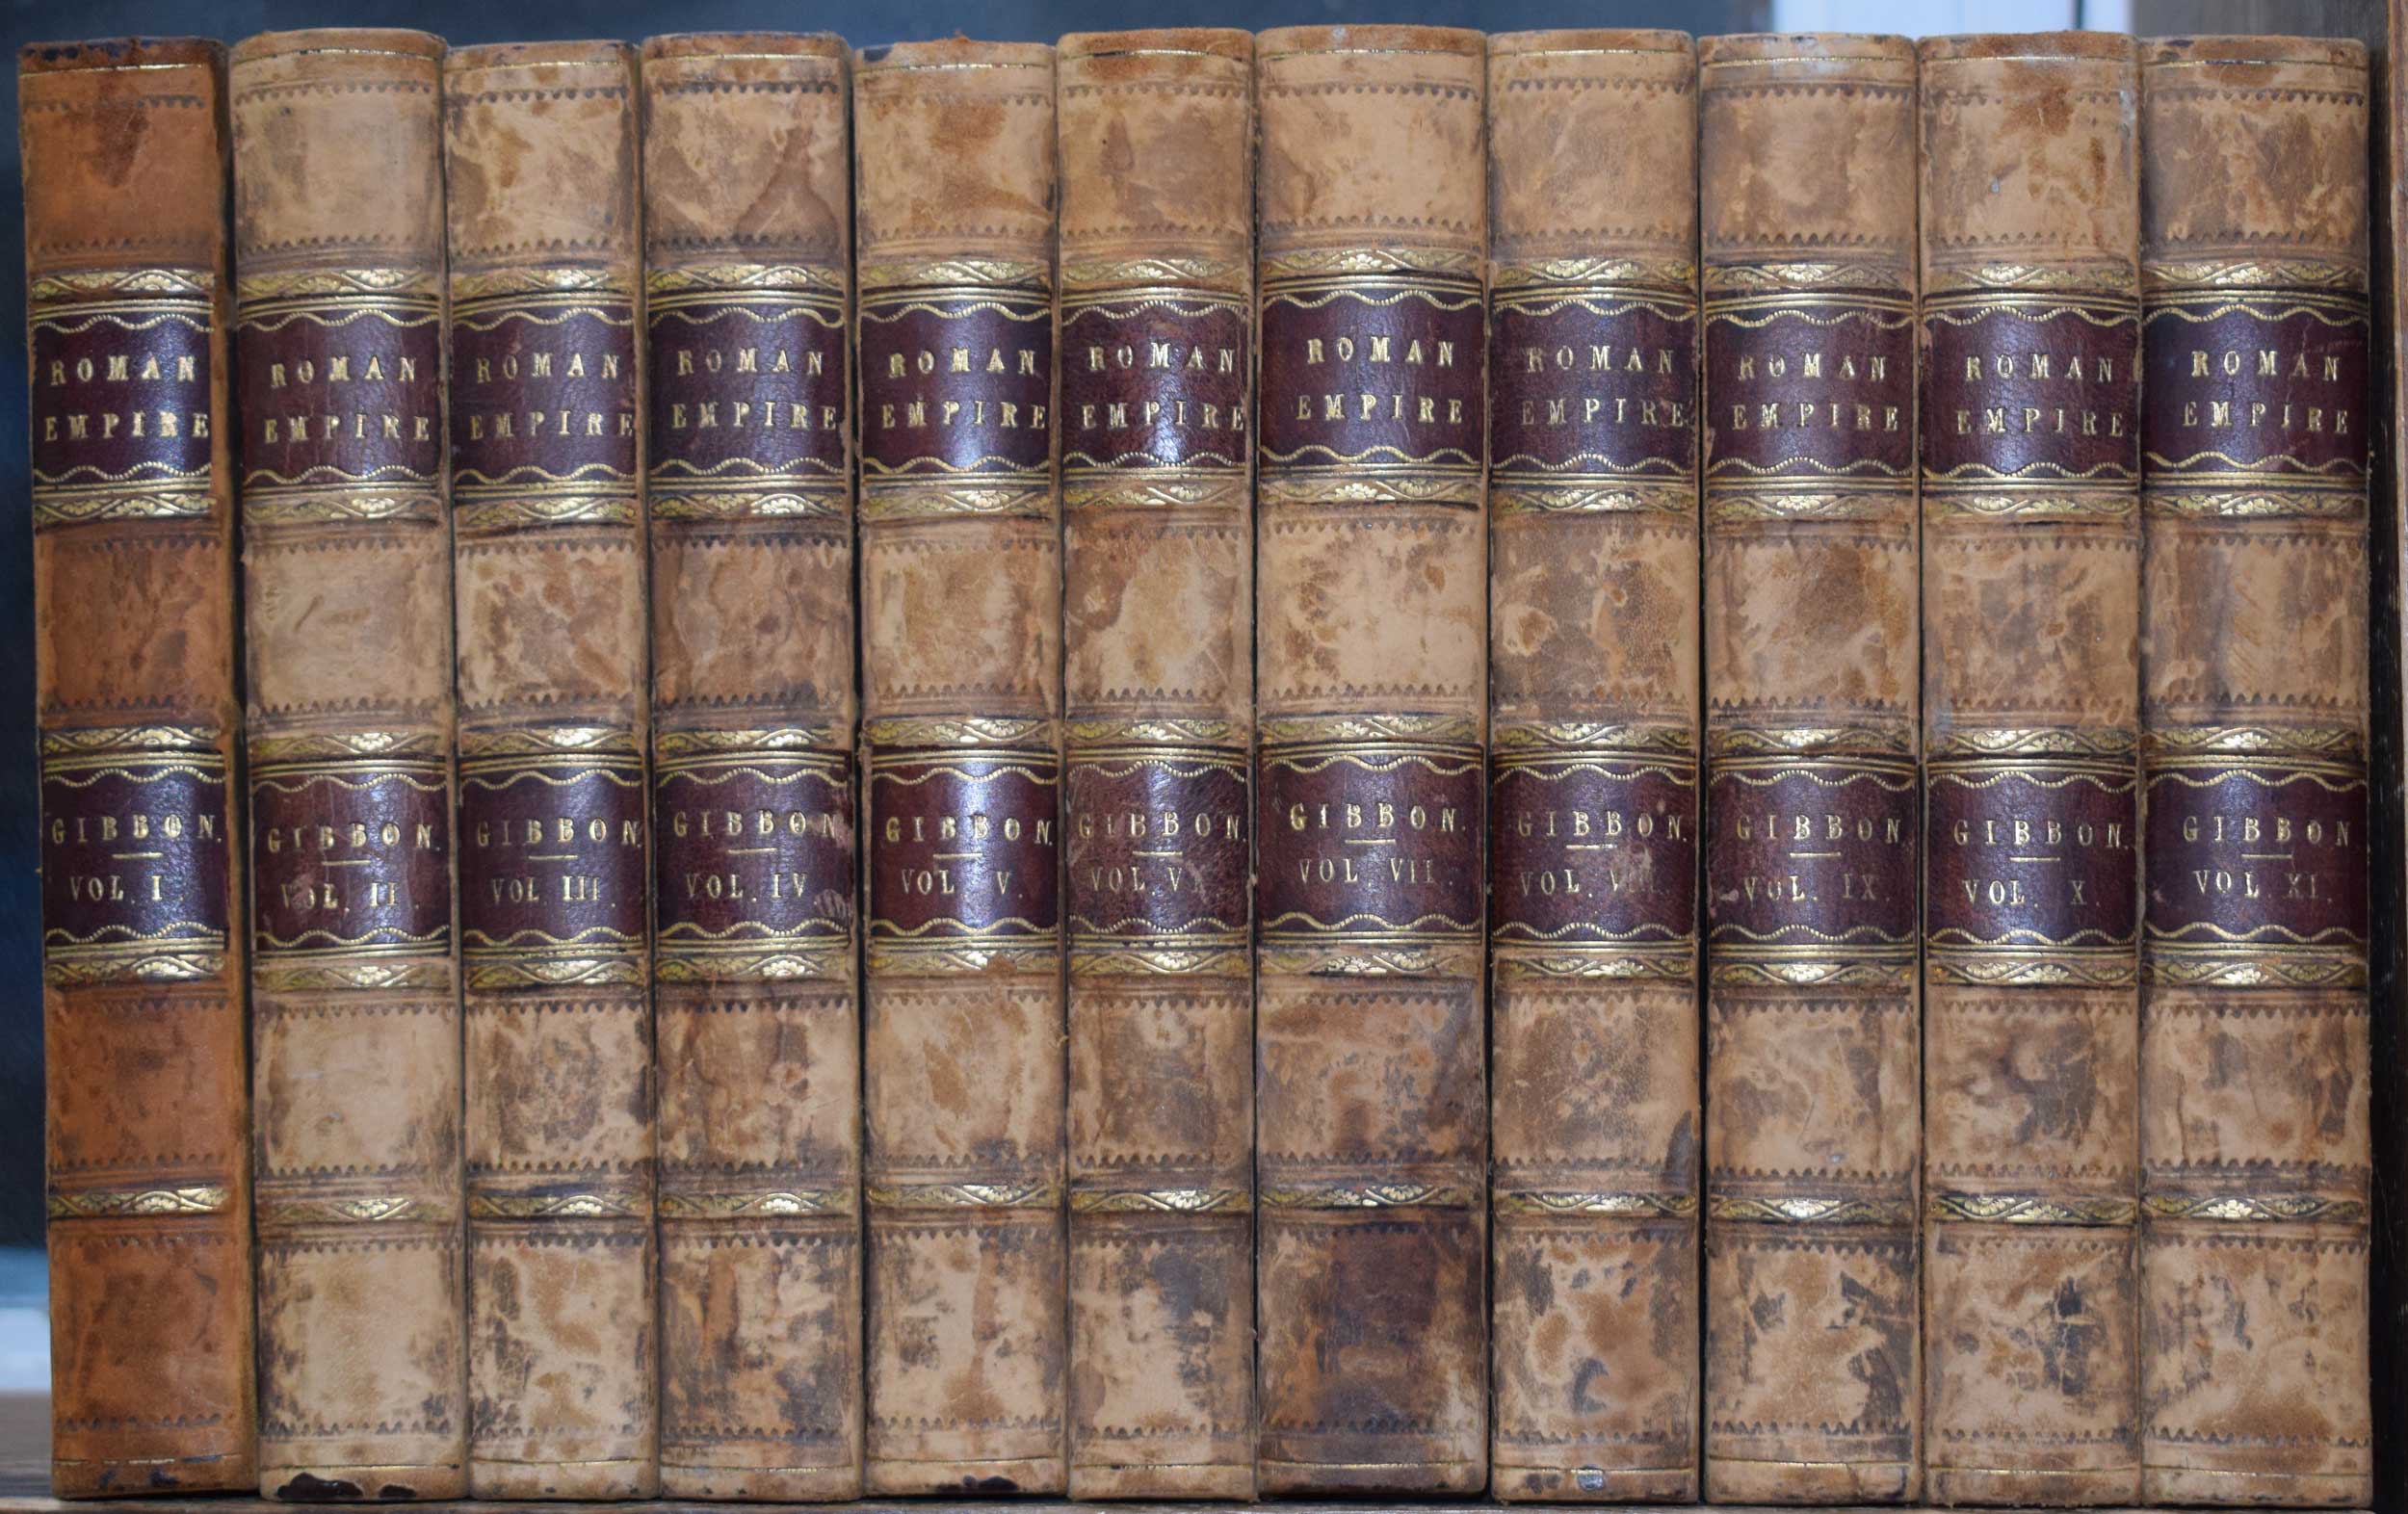 The History of the Decline and Fall of the Roman Empire. Tegg edition. 11 volume set. 1827.